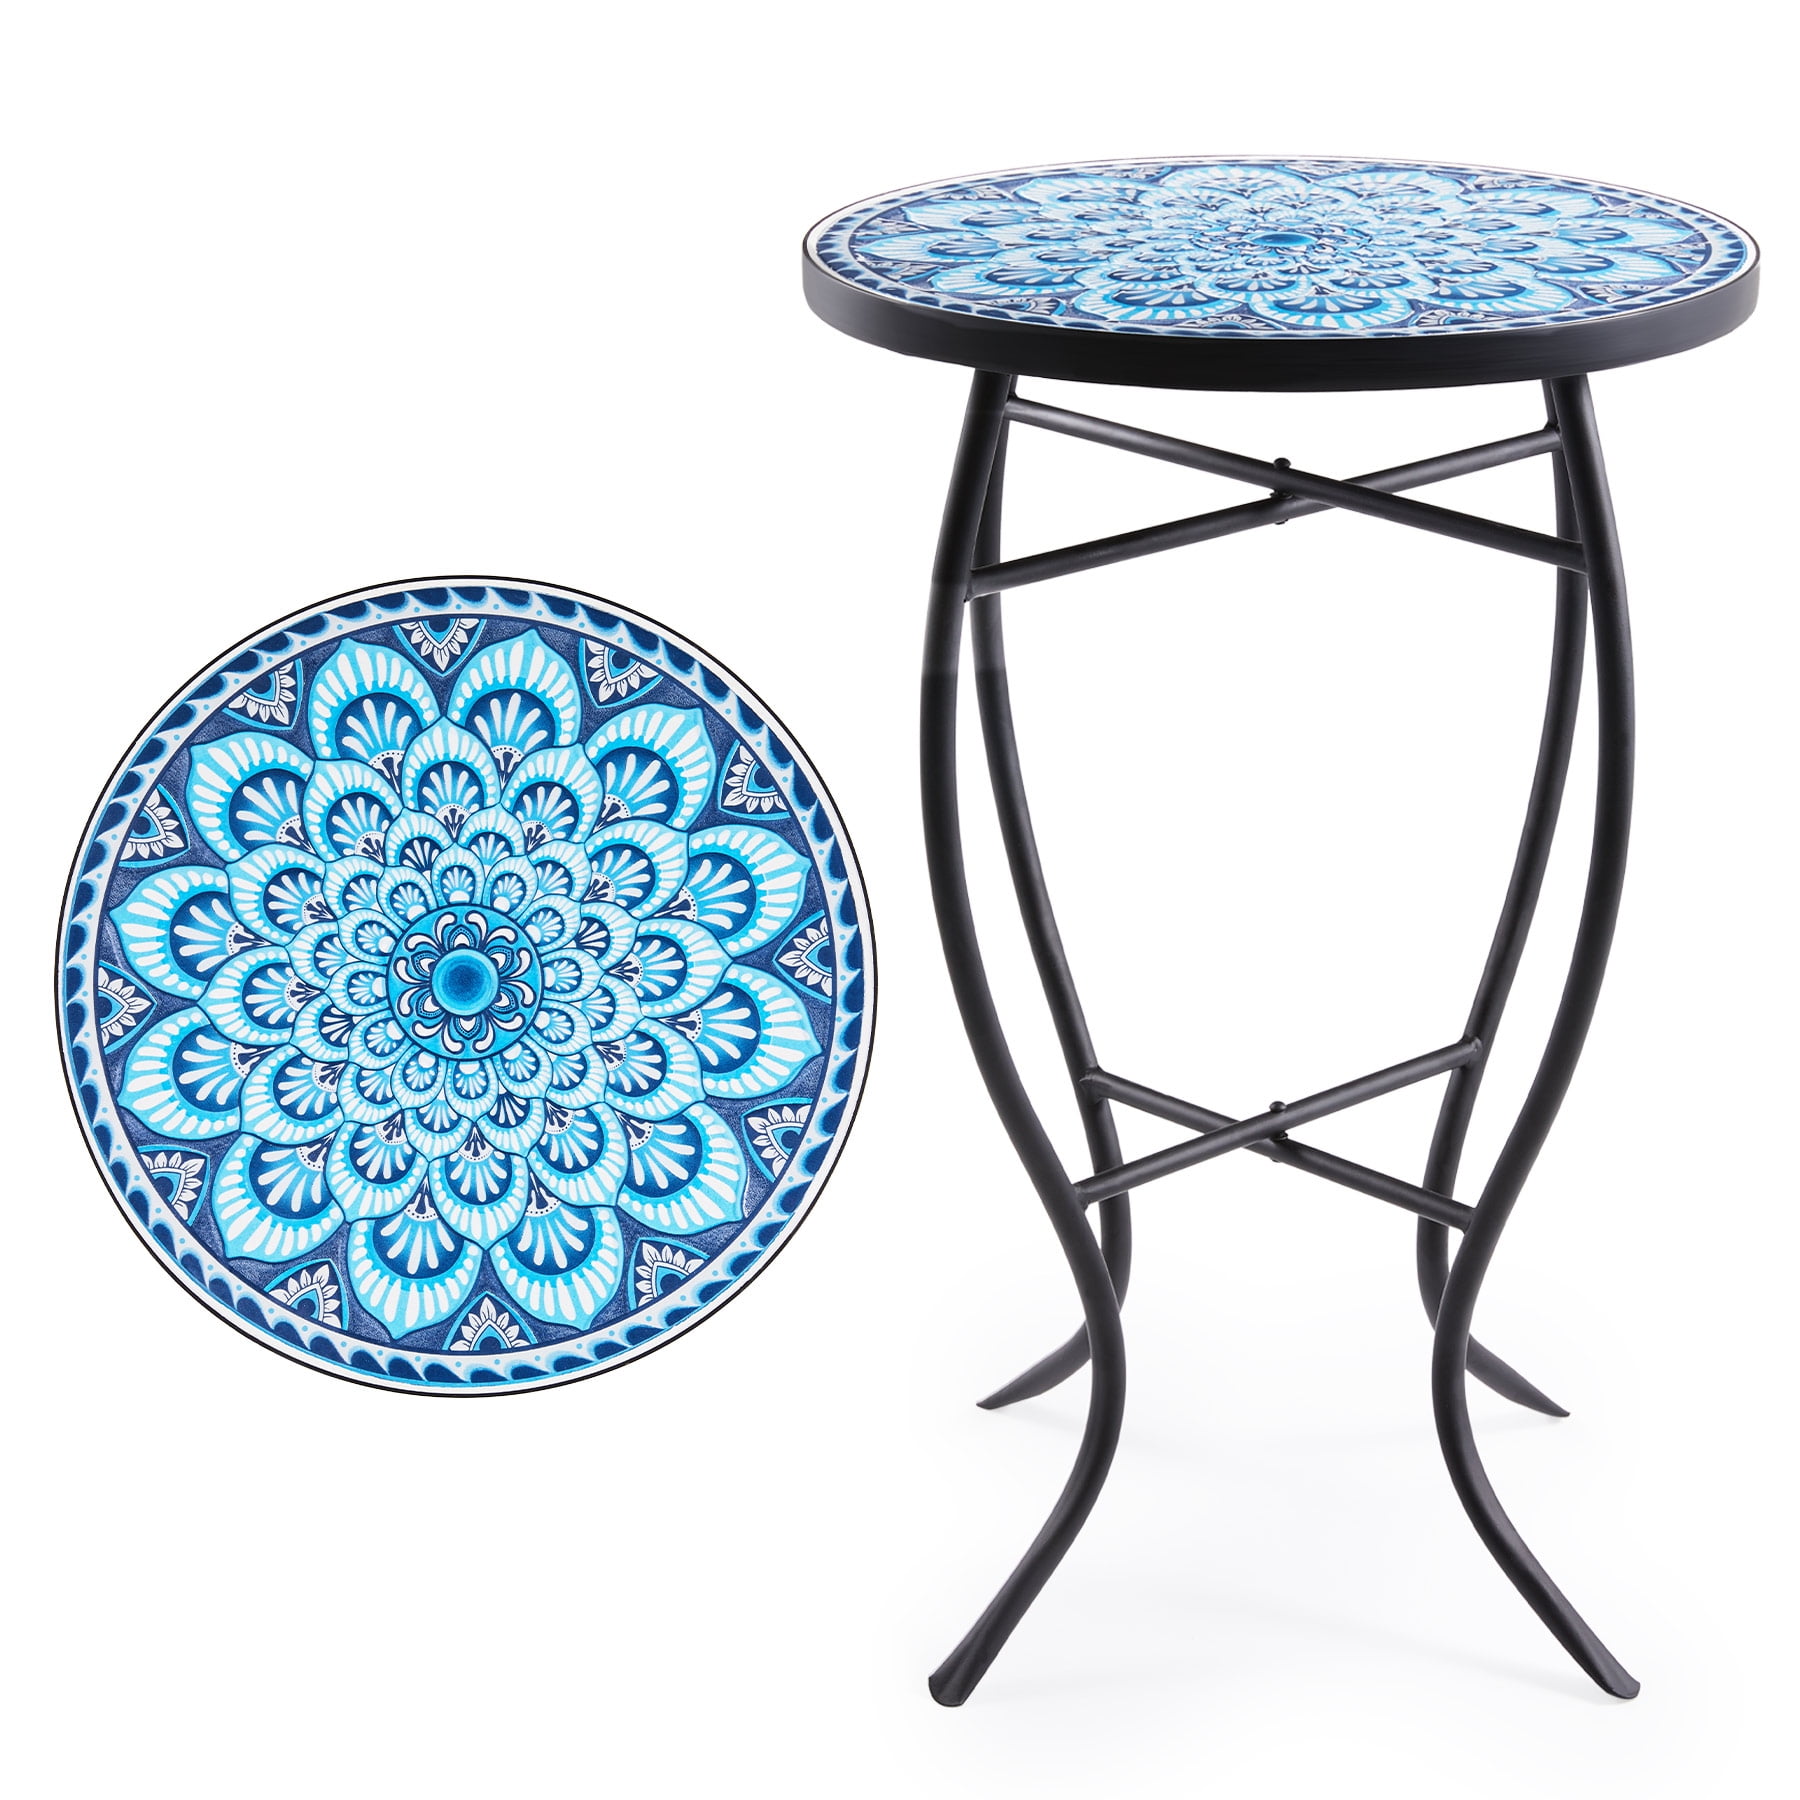 Mosaic Glass Tea Coffee End Side Table Garden Plant Round Stand Holder 2 Colors 